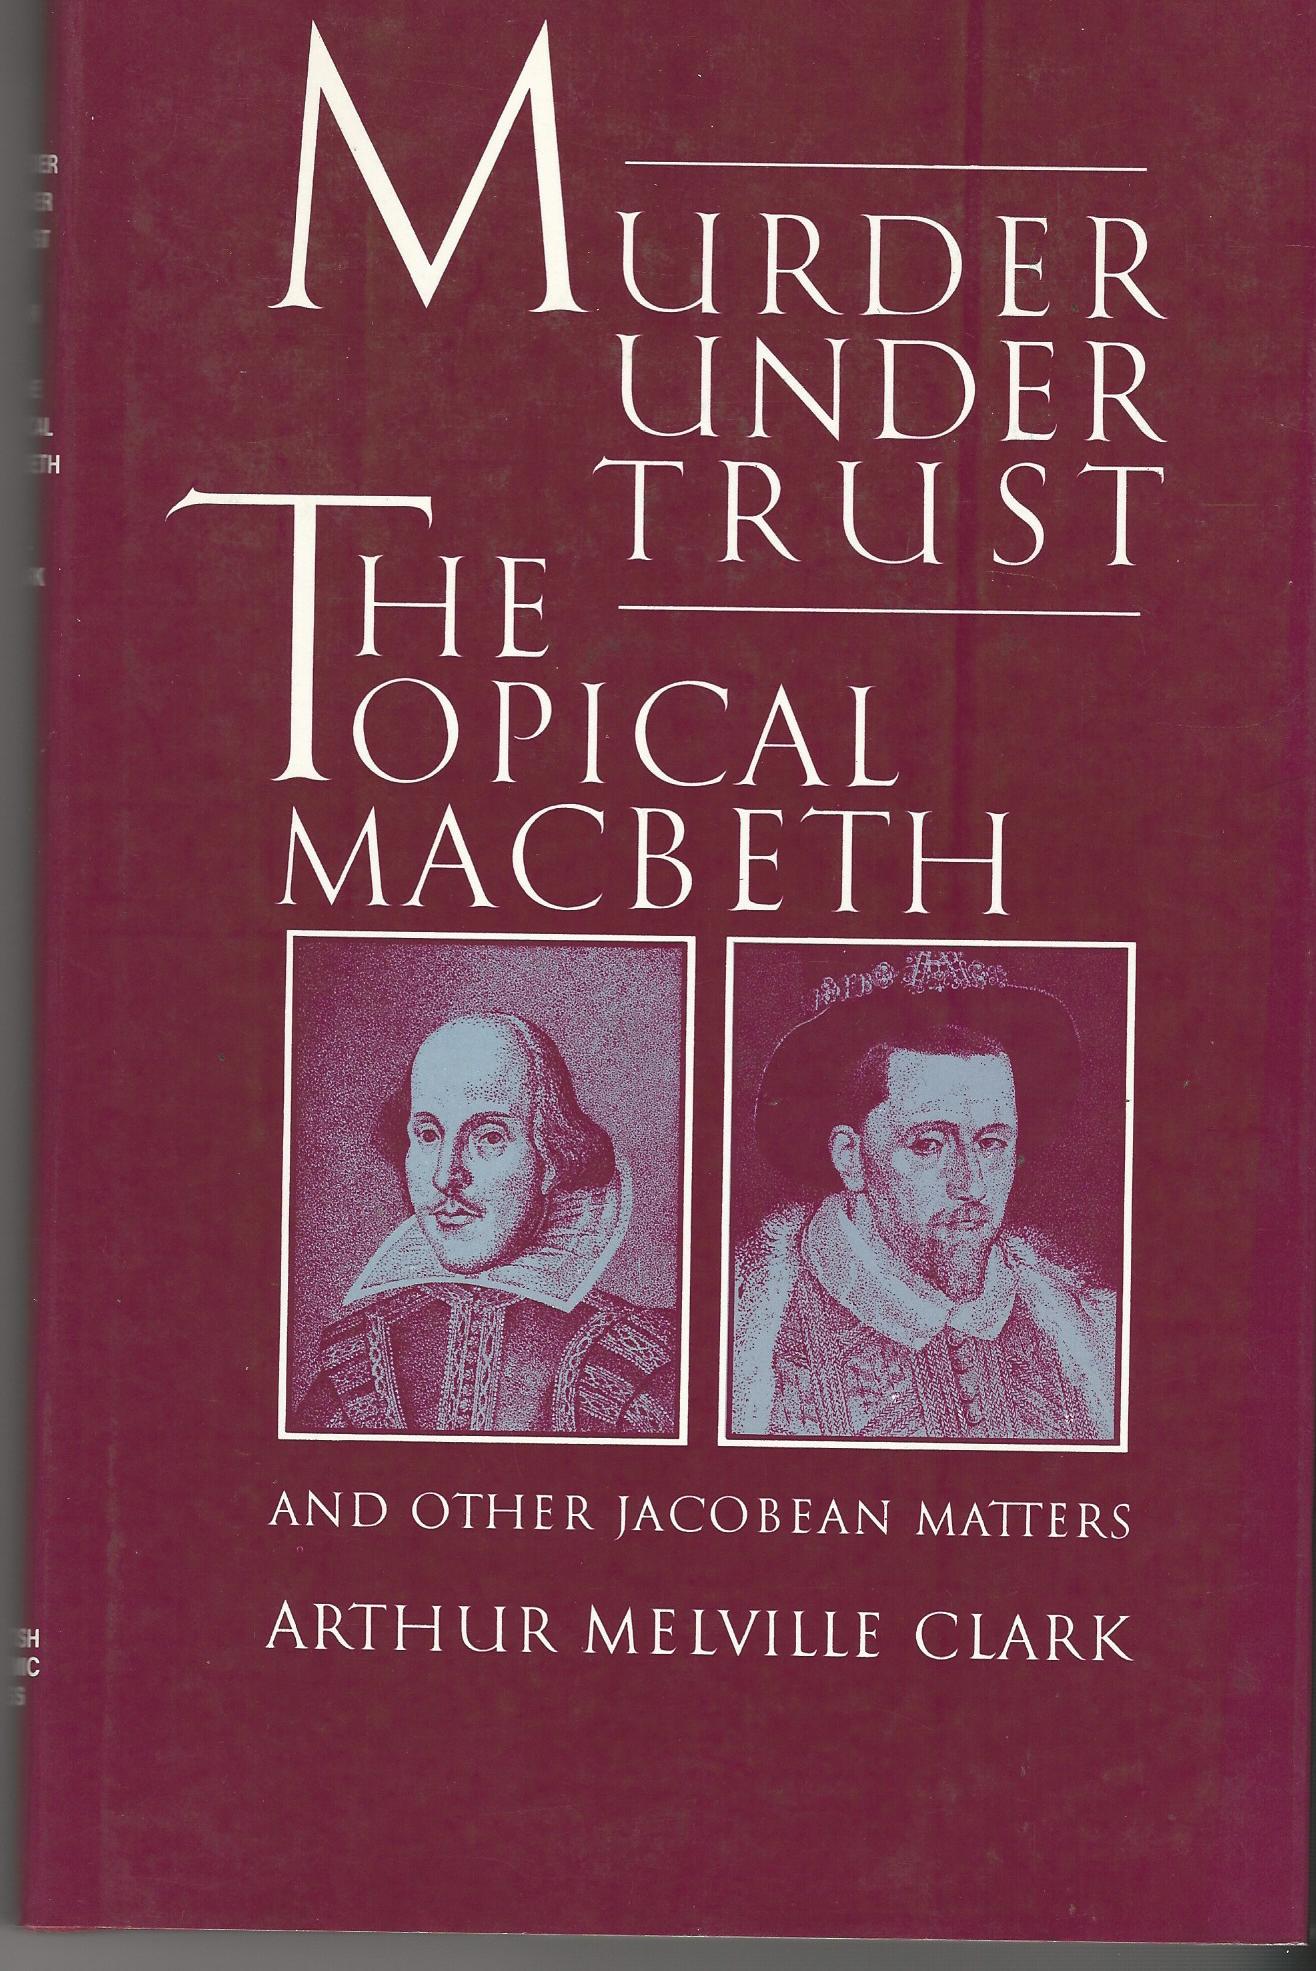 Image for Murder Under Trust: The Topical Macbeth.